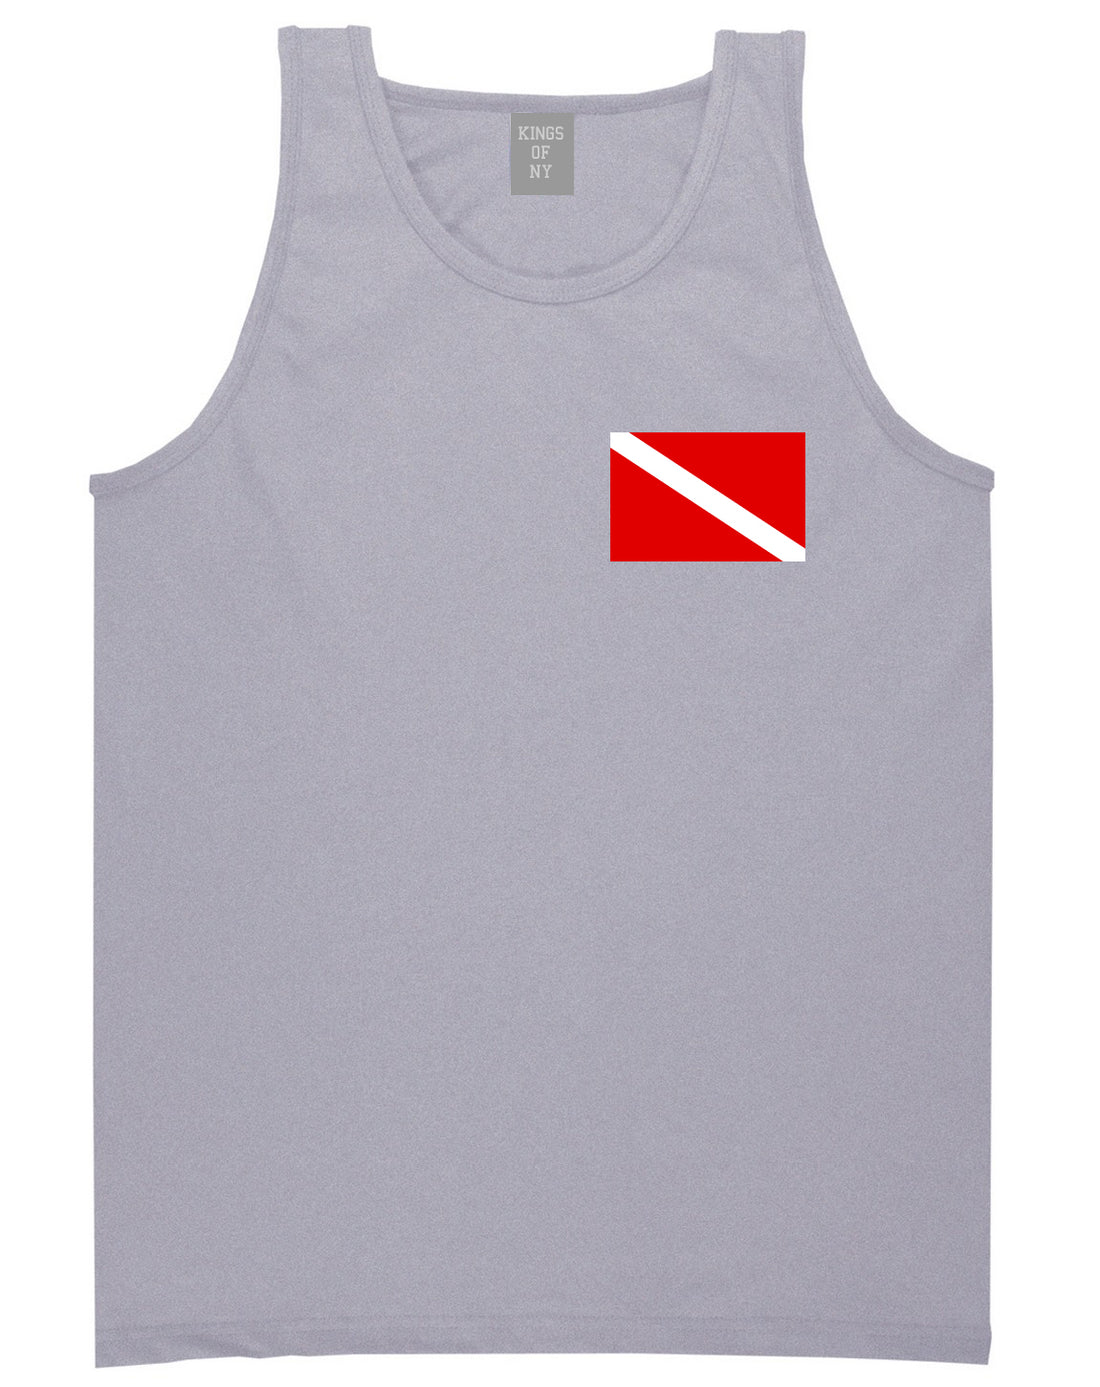 Scuba_Dive_Flag_Chest Mens Grey Tank Top Shirt by Kings Of NY